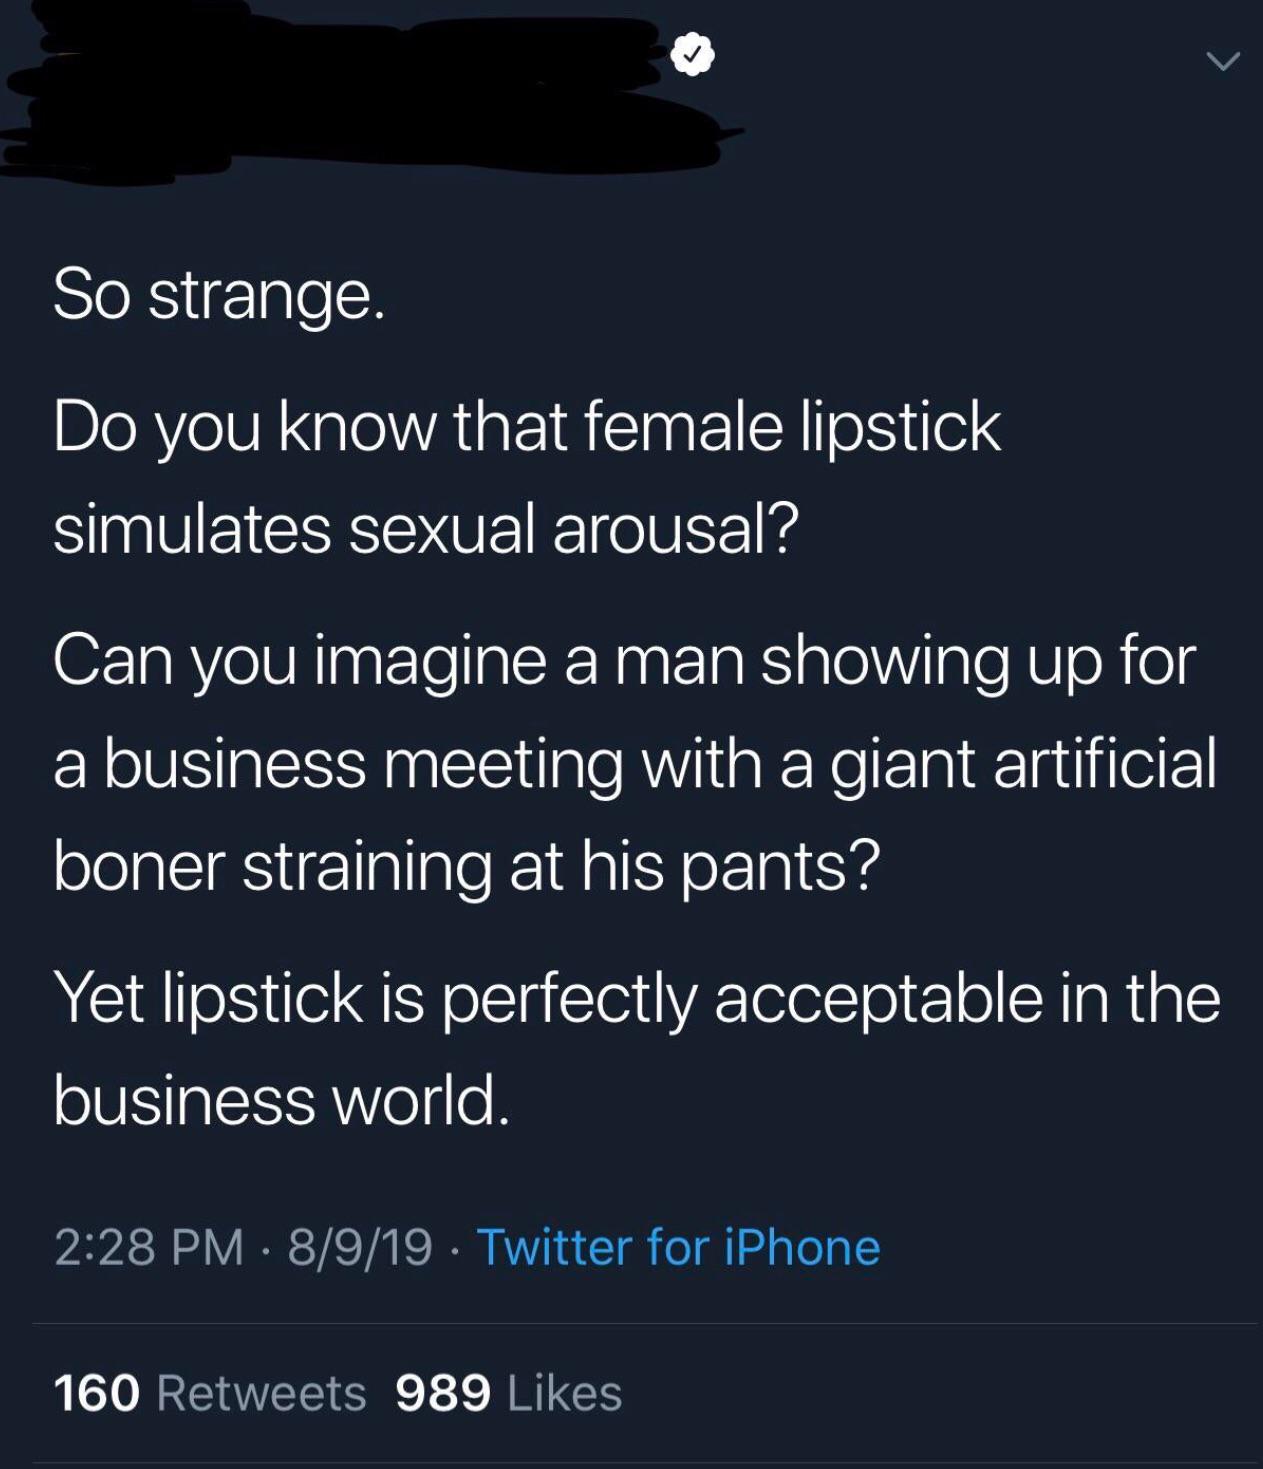 So strange. Do you know that female lipstick simulates sexual arousal? Can you imagine a man showing up for a business meeting with a giant artificial boner straining at his pants? Yet lipstick is perfectly acceptable in the business world. 8919 Twitter…